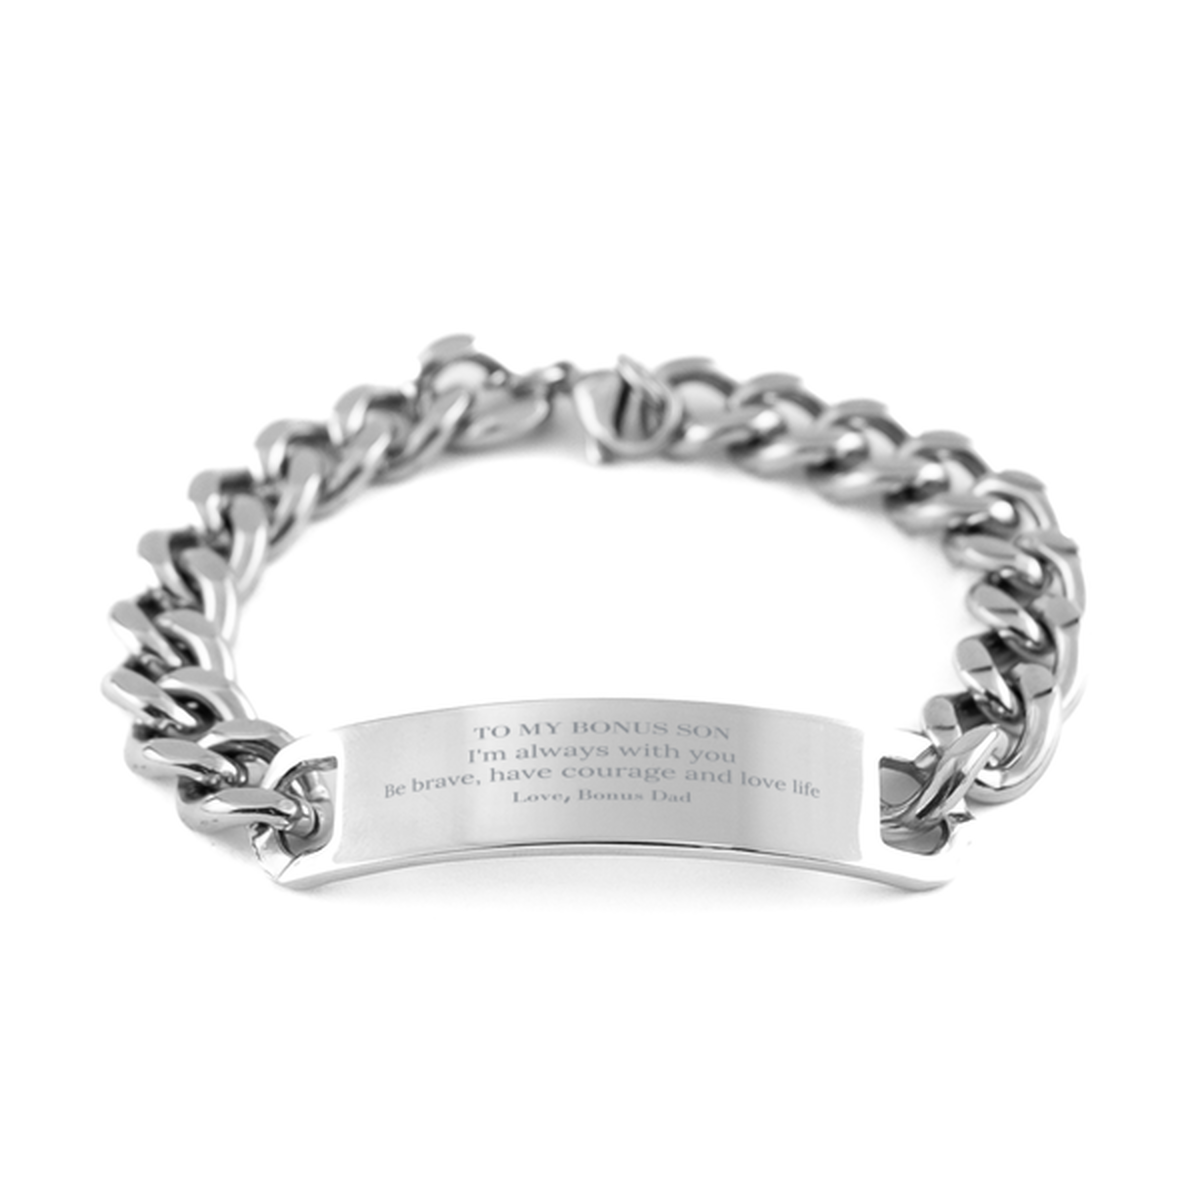 To My Bonus Son Gifts from Bonus Dad, Unique Cuban Chain Stainless Steel Bracelet Inspirational Christmas Birthday Graduation Gifts for Bonus Son I'm always with you. Be brave, have courage and love life. Love, Bonus Dad